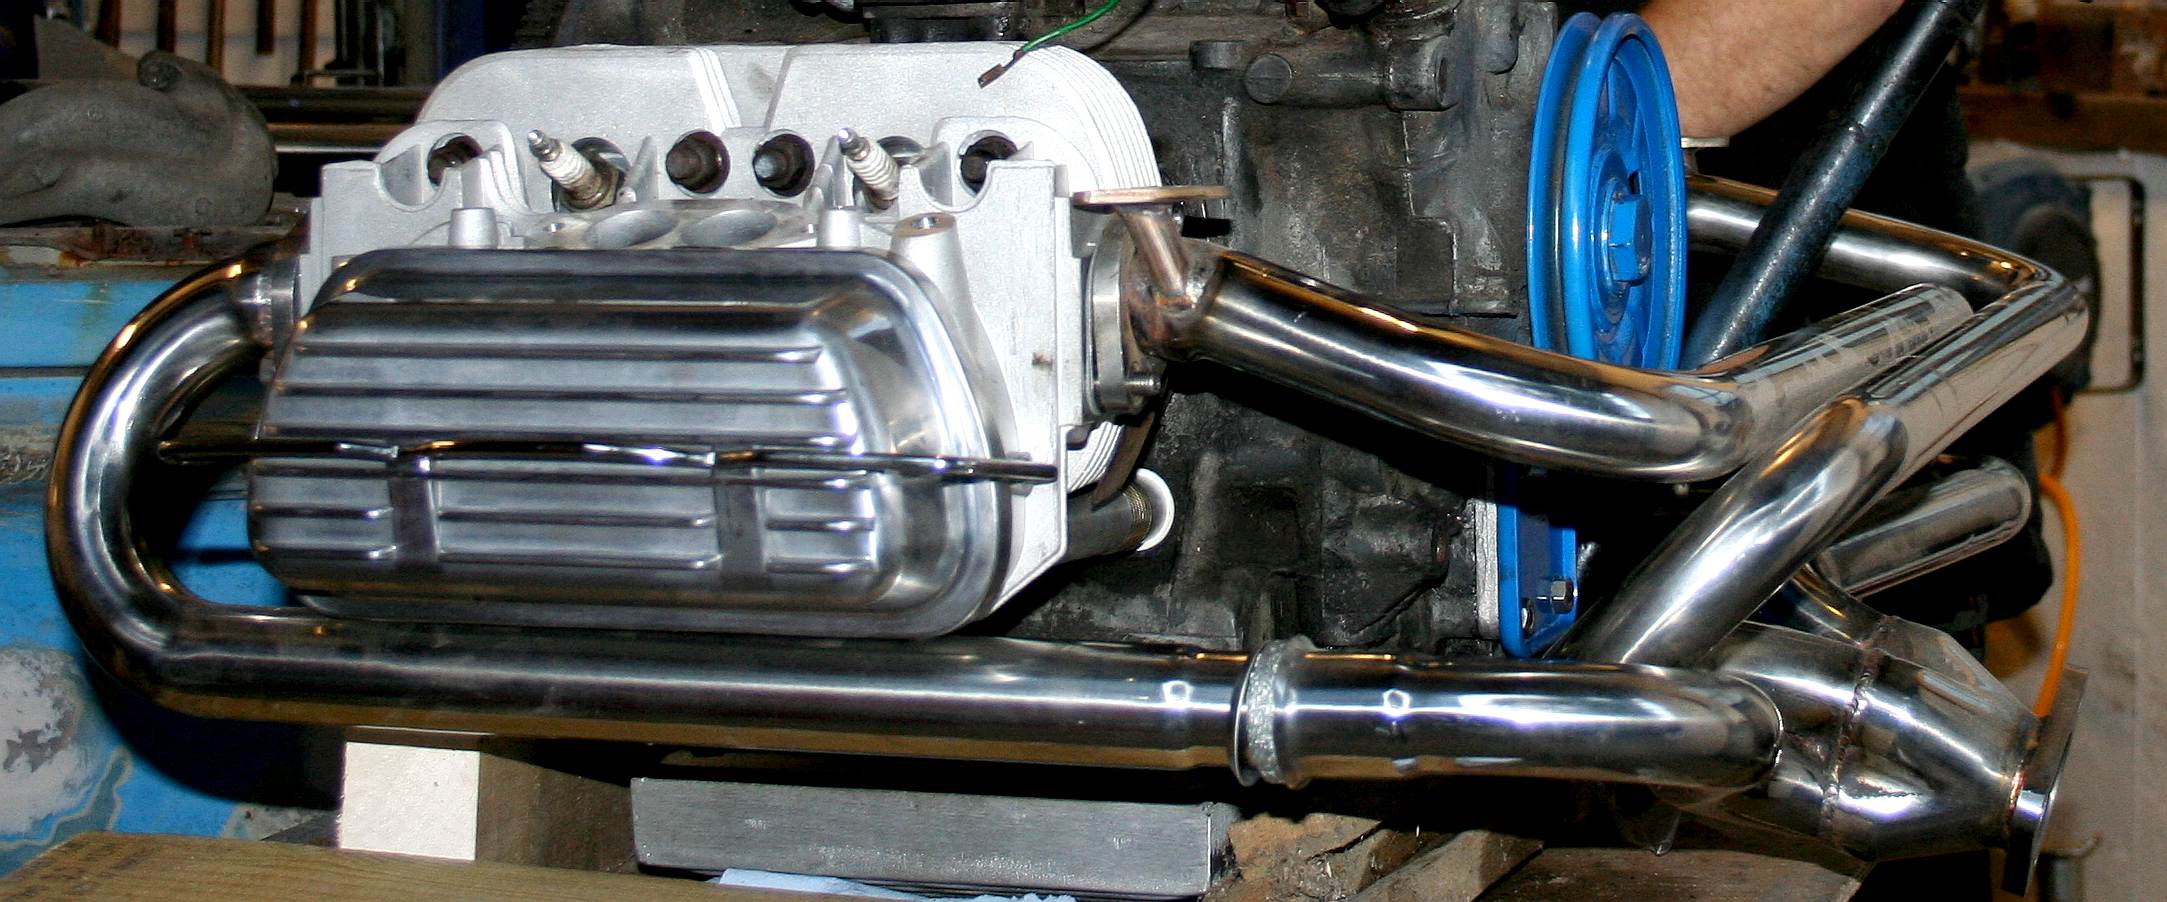 Volkswagen stainless steel exhaust system for type one and two vehicles